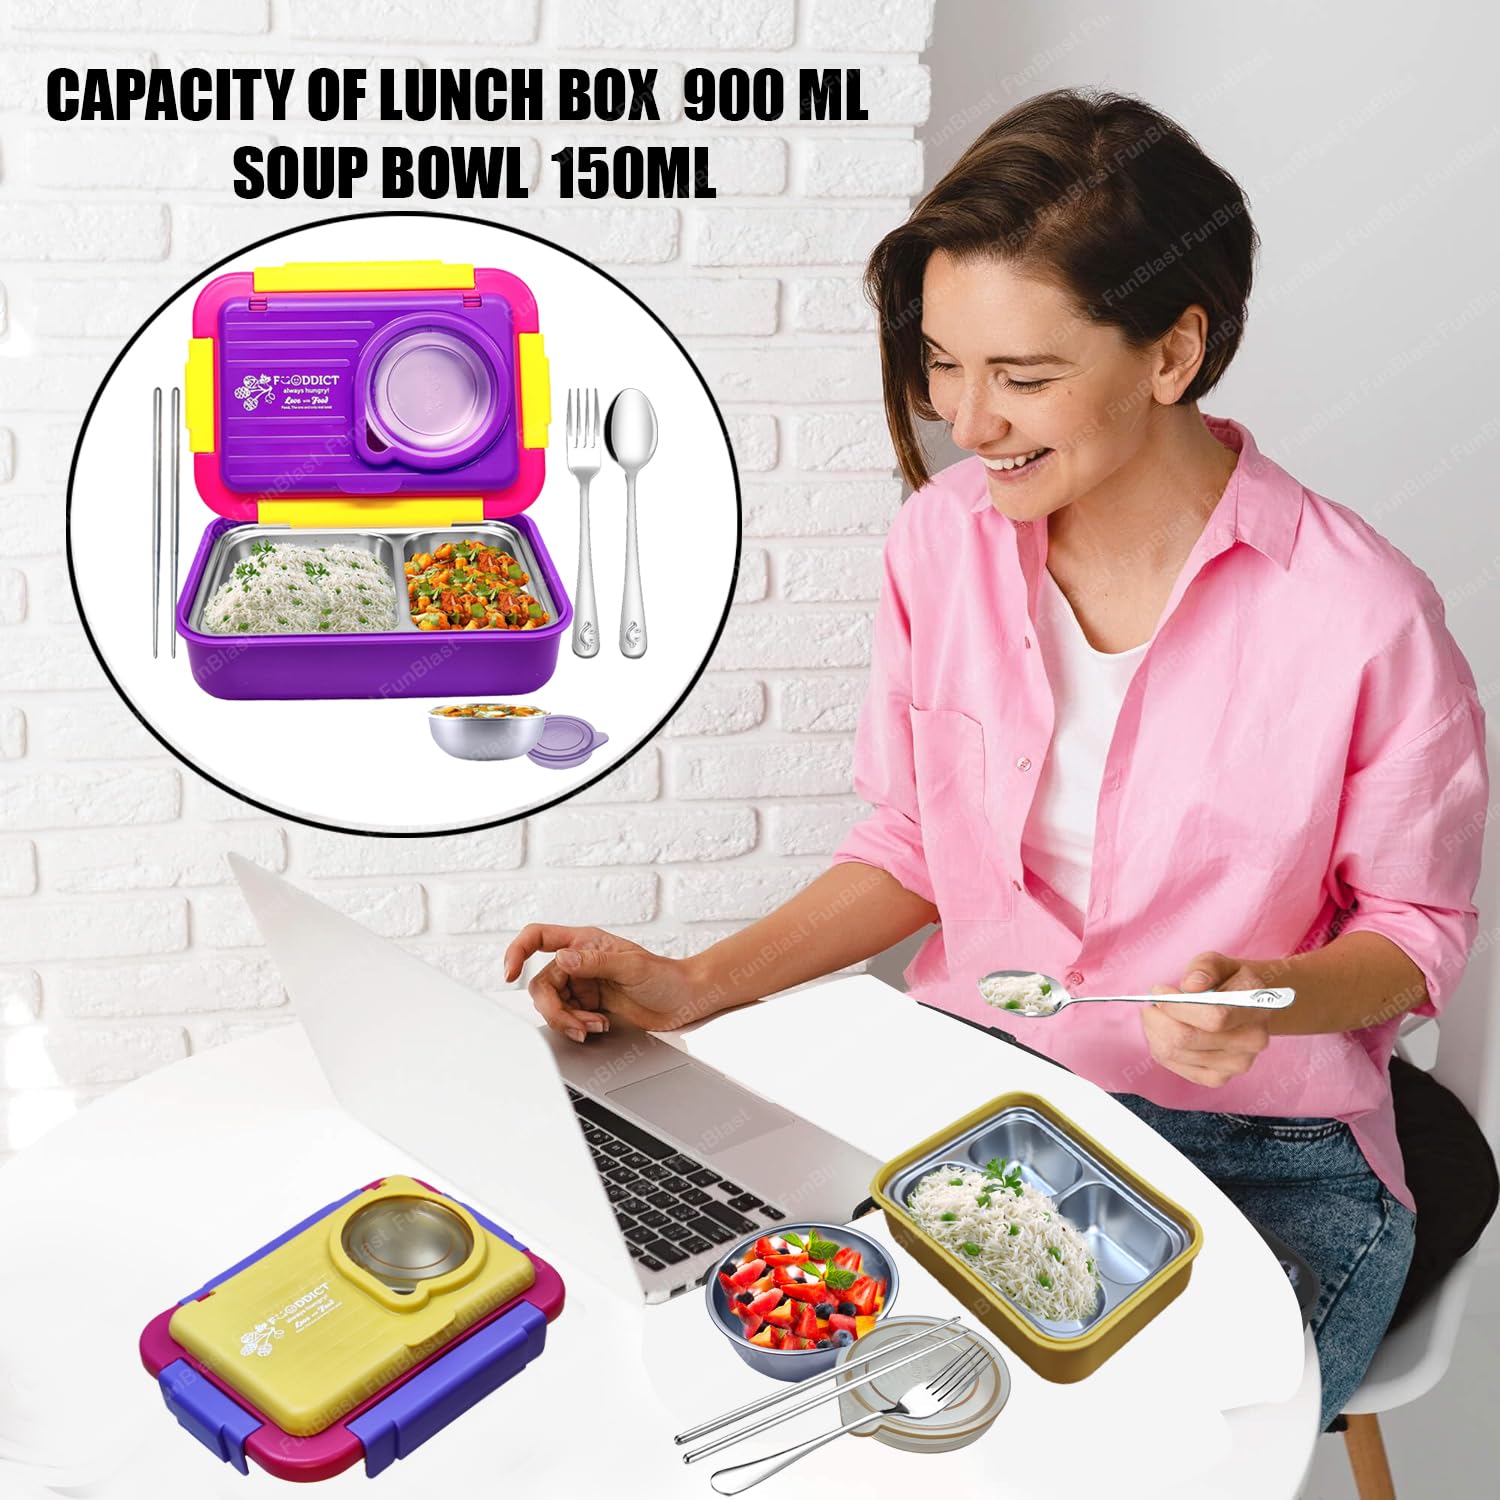 Lunch Box for Kids – Tiffin Box, Stainless Steel Lunch Box, Lunch Boxes for Office Men, 5 Compartment Lunch Box with Bowl, Spoon, Fork & Chopstick (Purple)